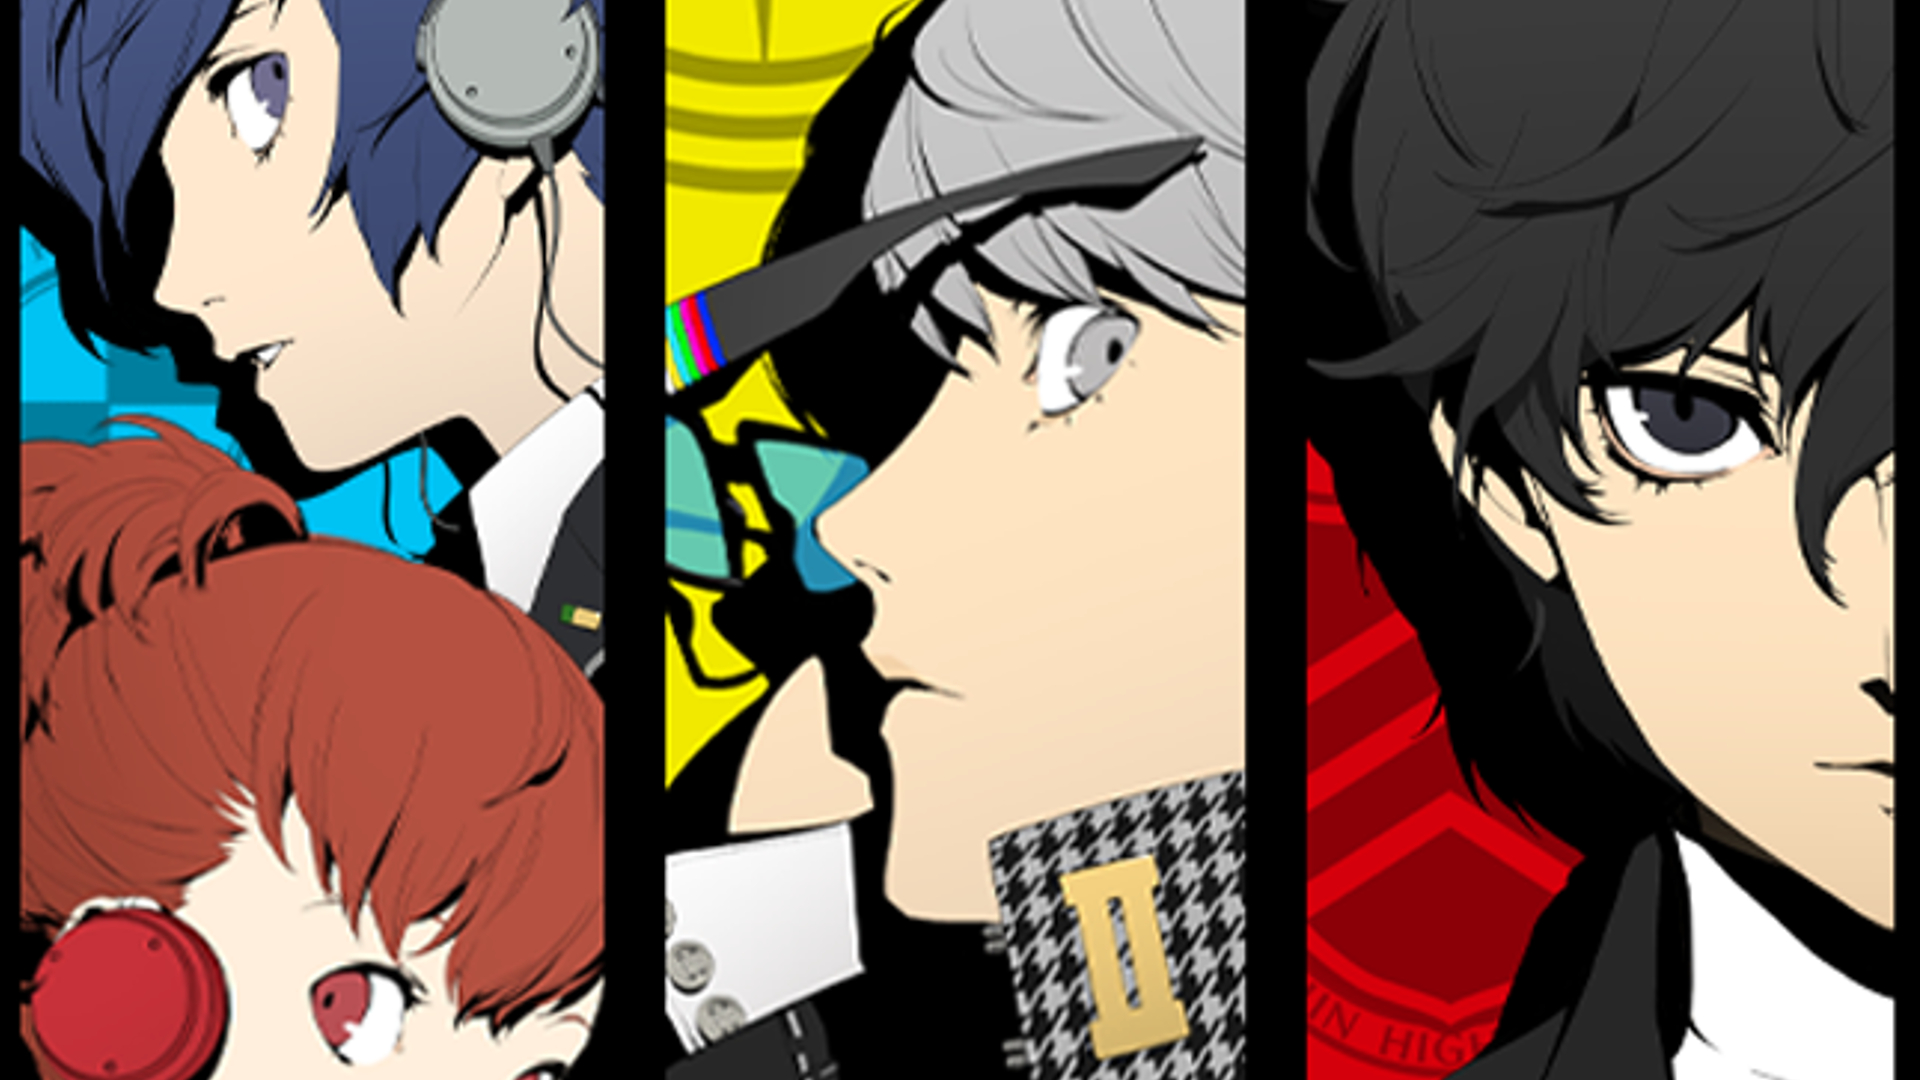 Persona 3, 4 and 5's protagonists.